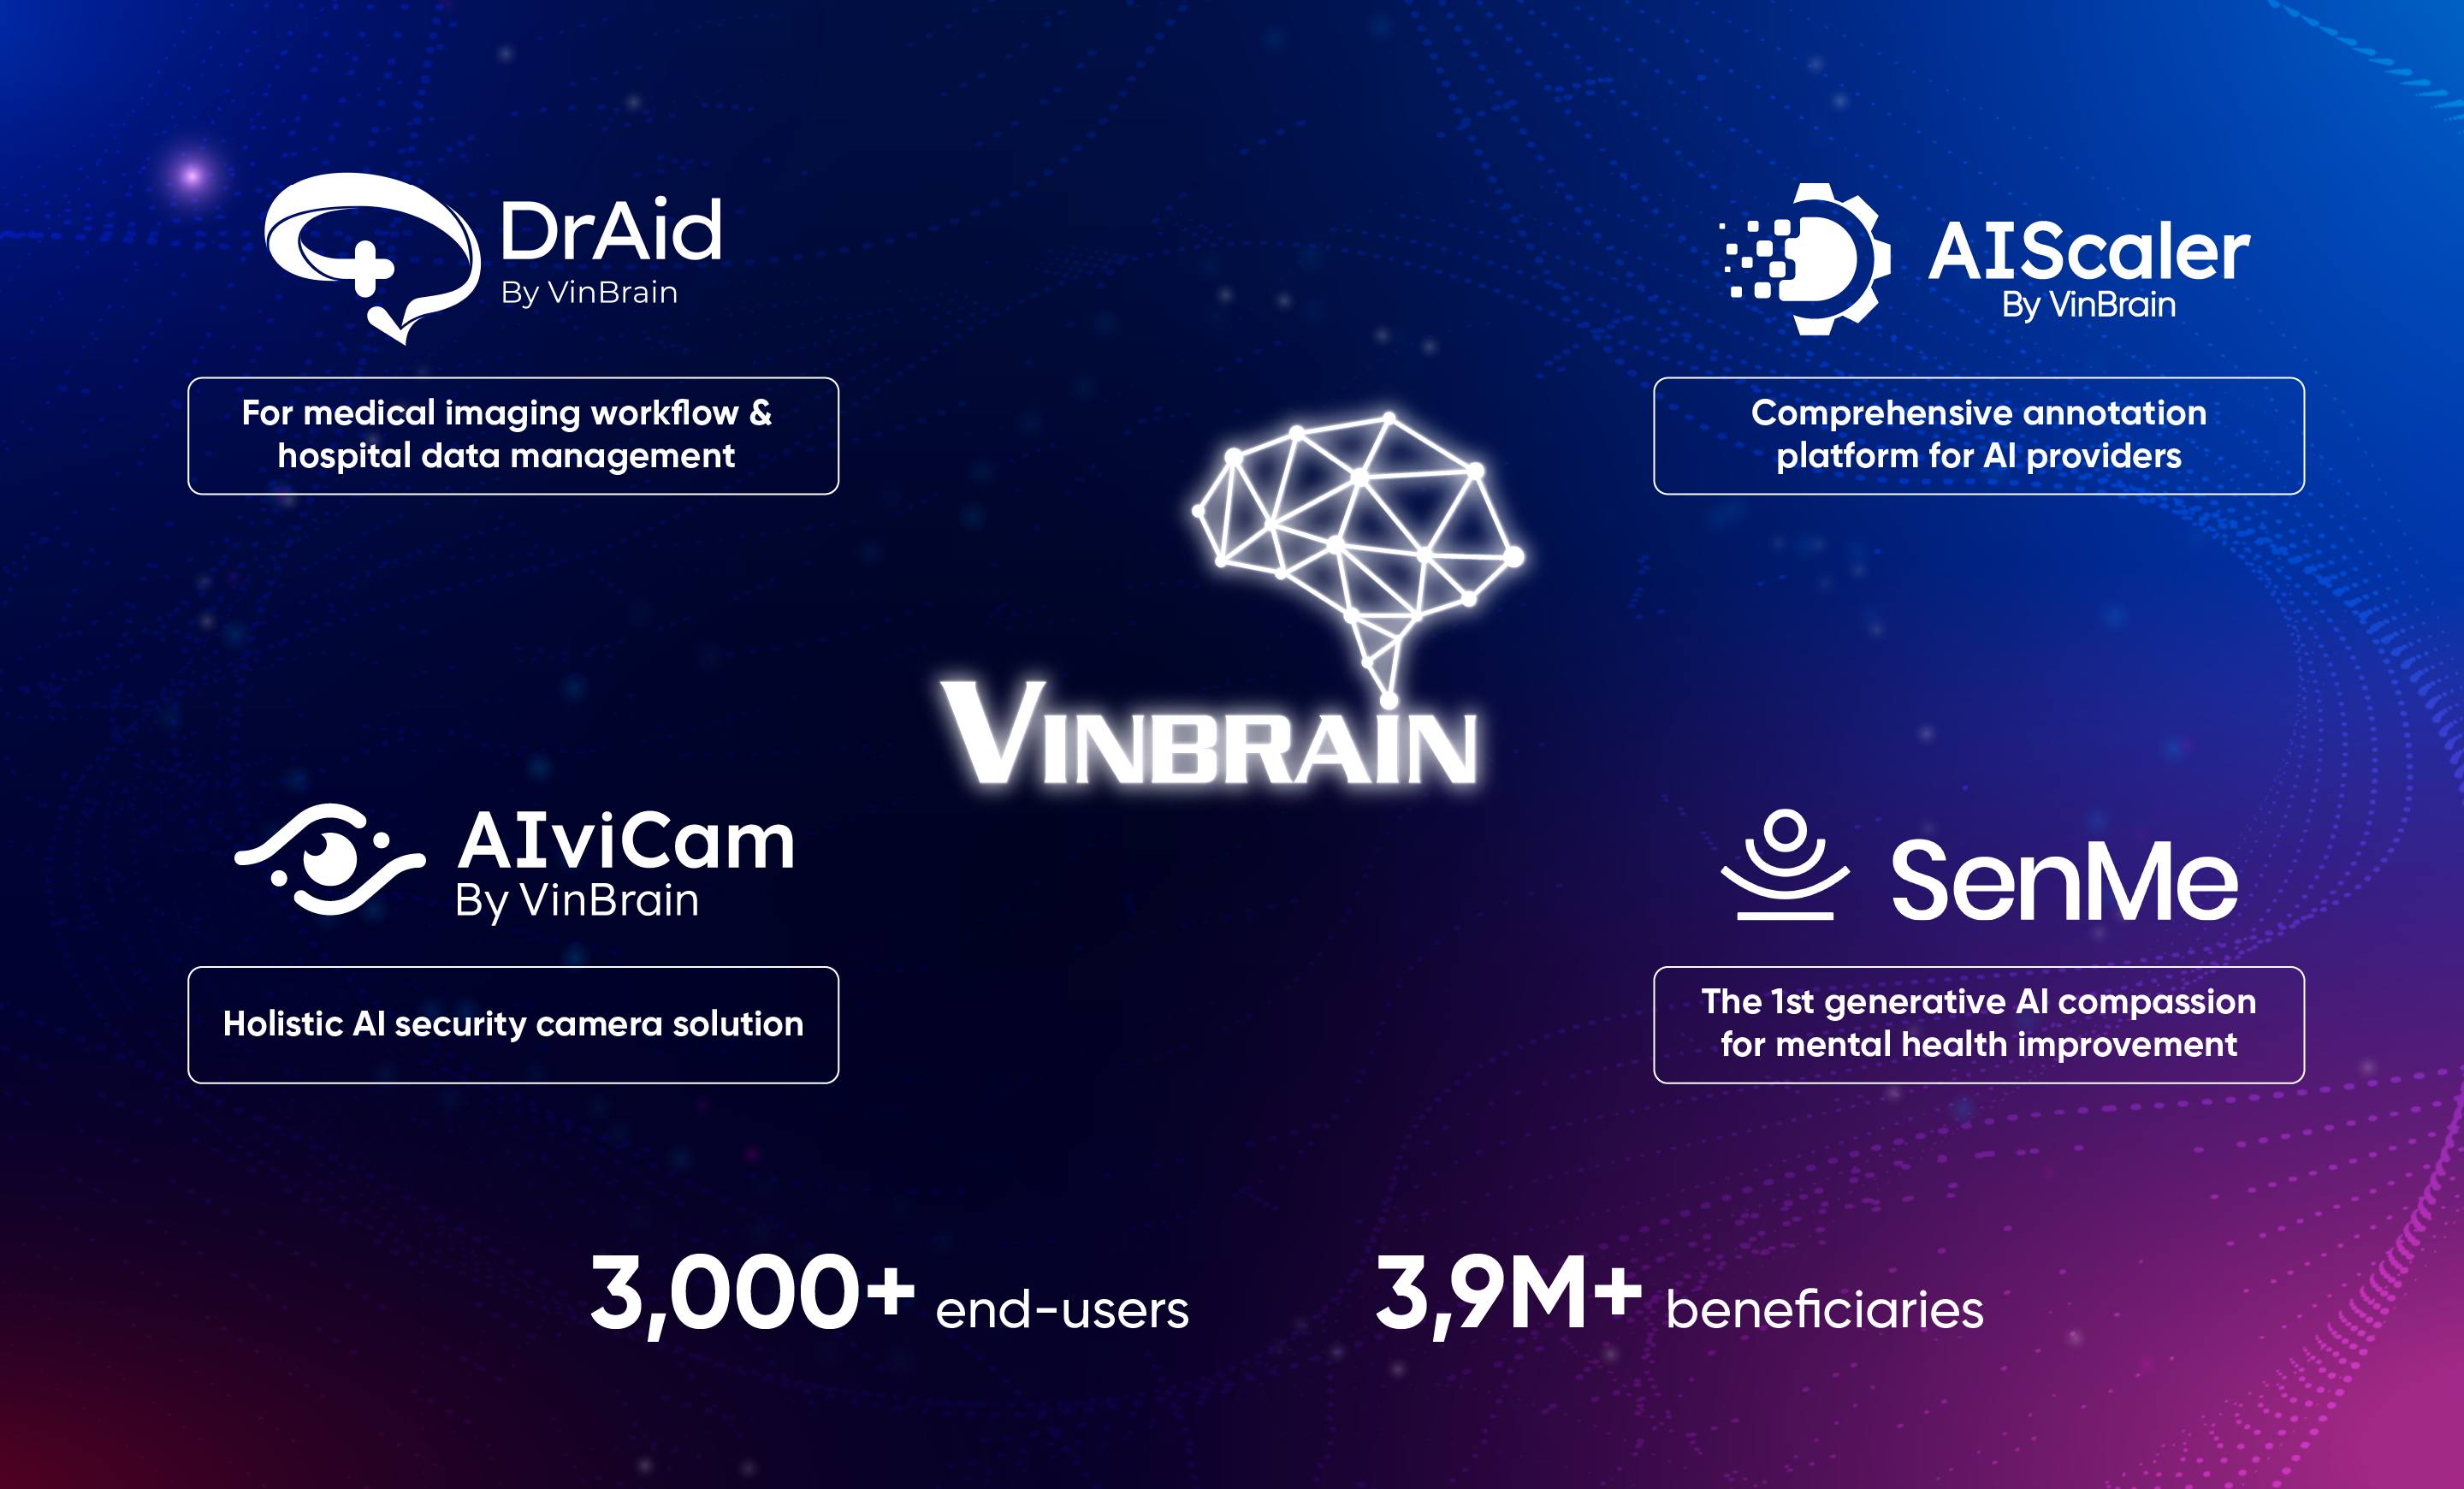 VinBrain offers comprehensive AI and data platforms, including an annotation service aiding 8,000 disadvantaged students 